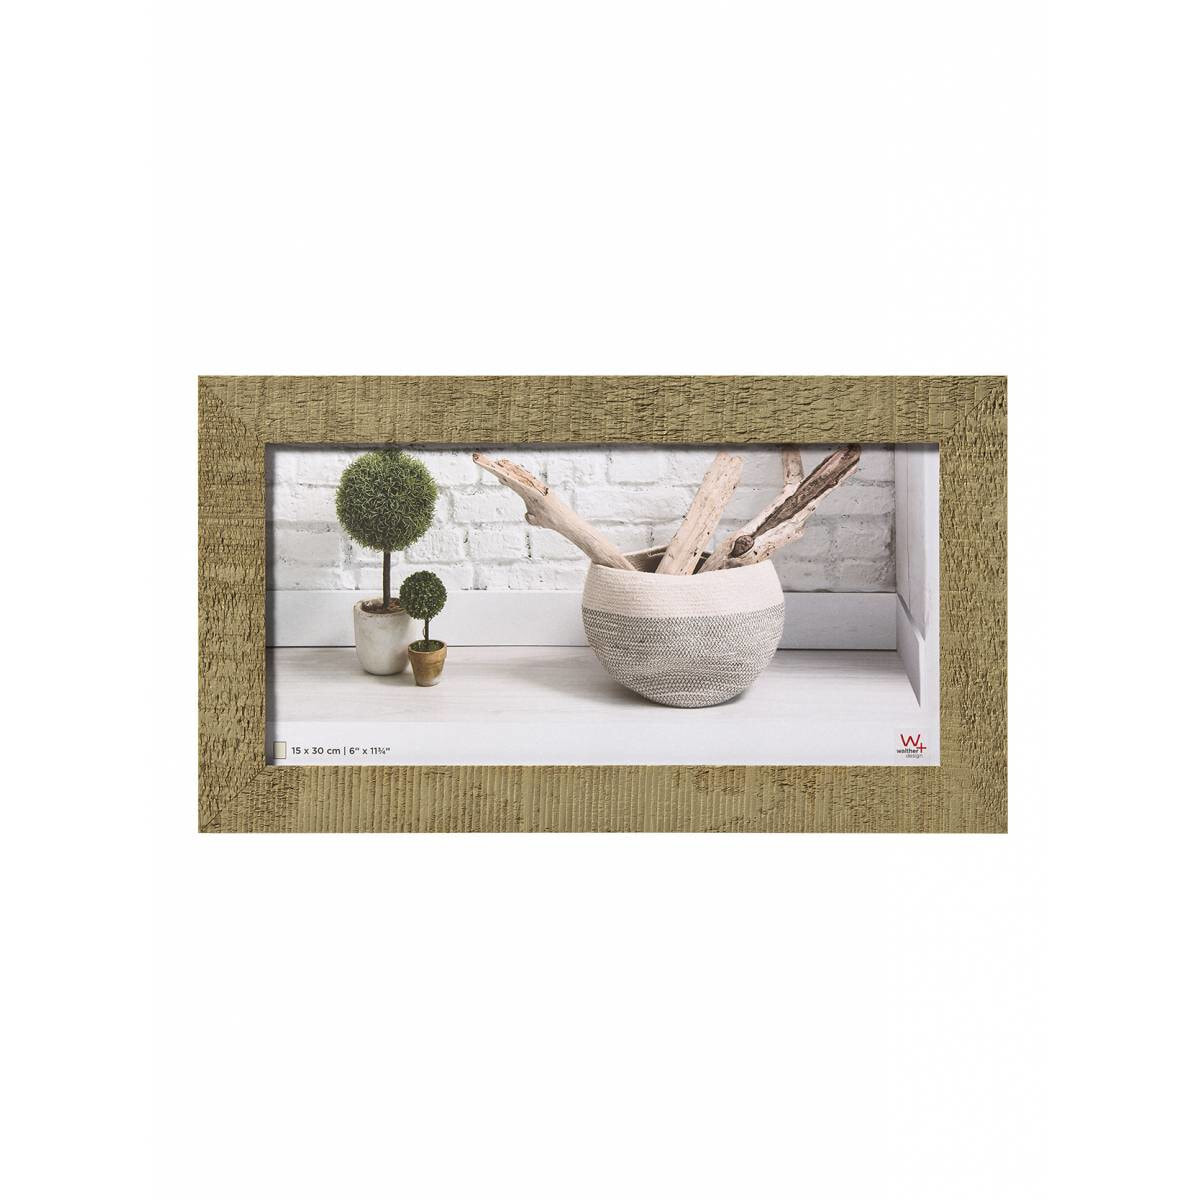 Walther HO153C - Wood - Beige - Brown - Single picture frame - Wall - 15 x 30 cm - Rectangular